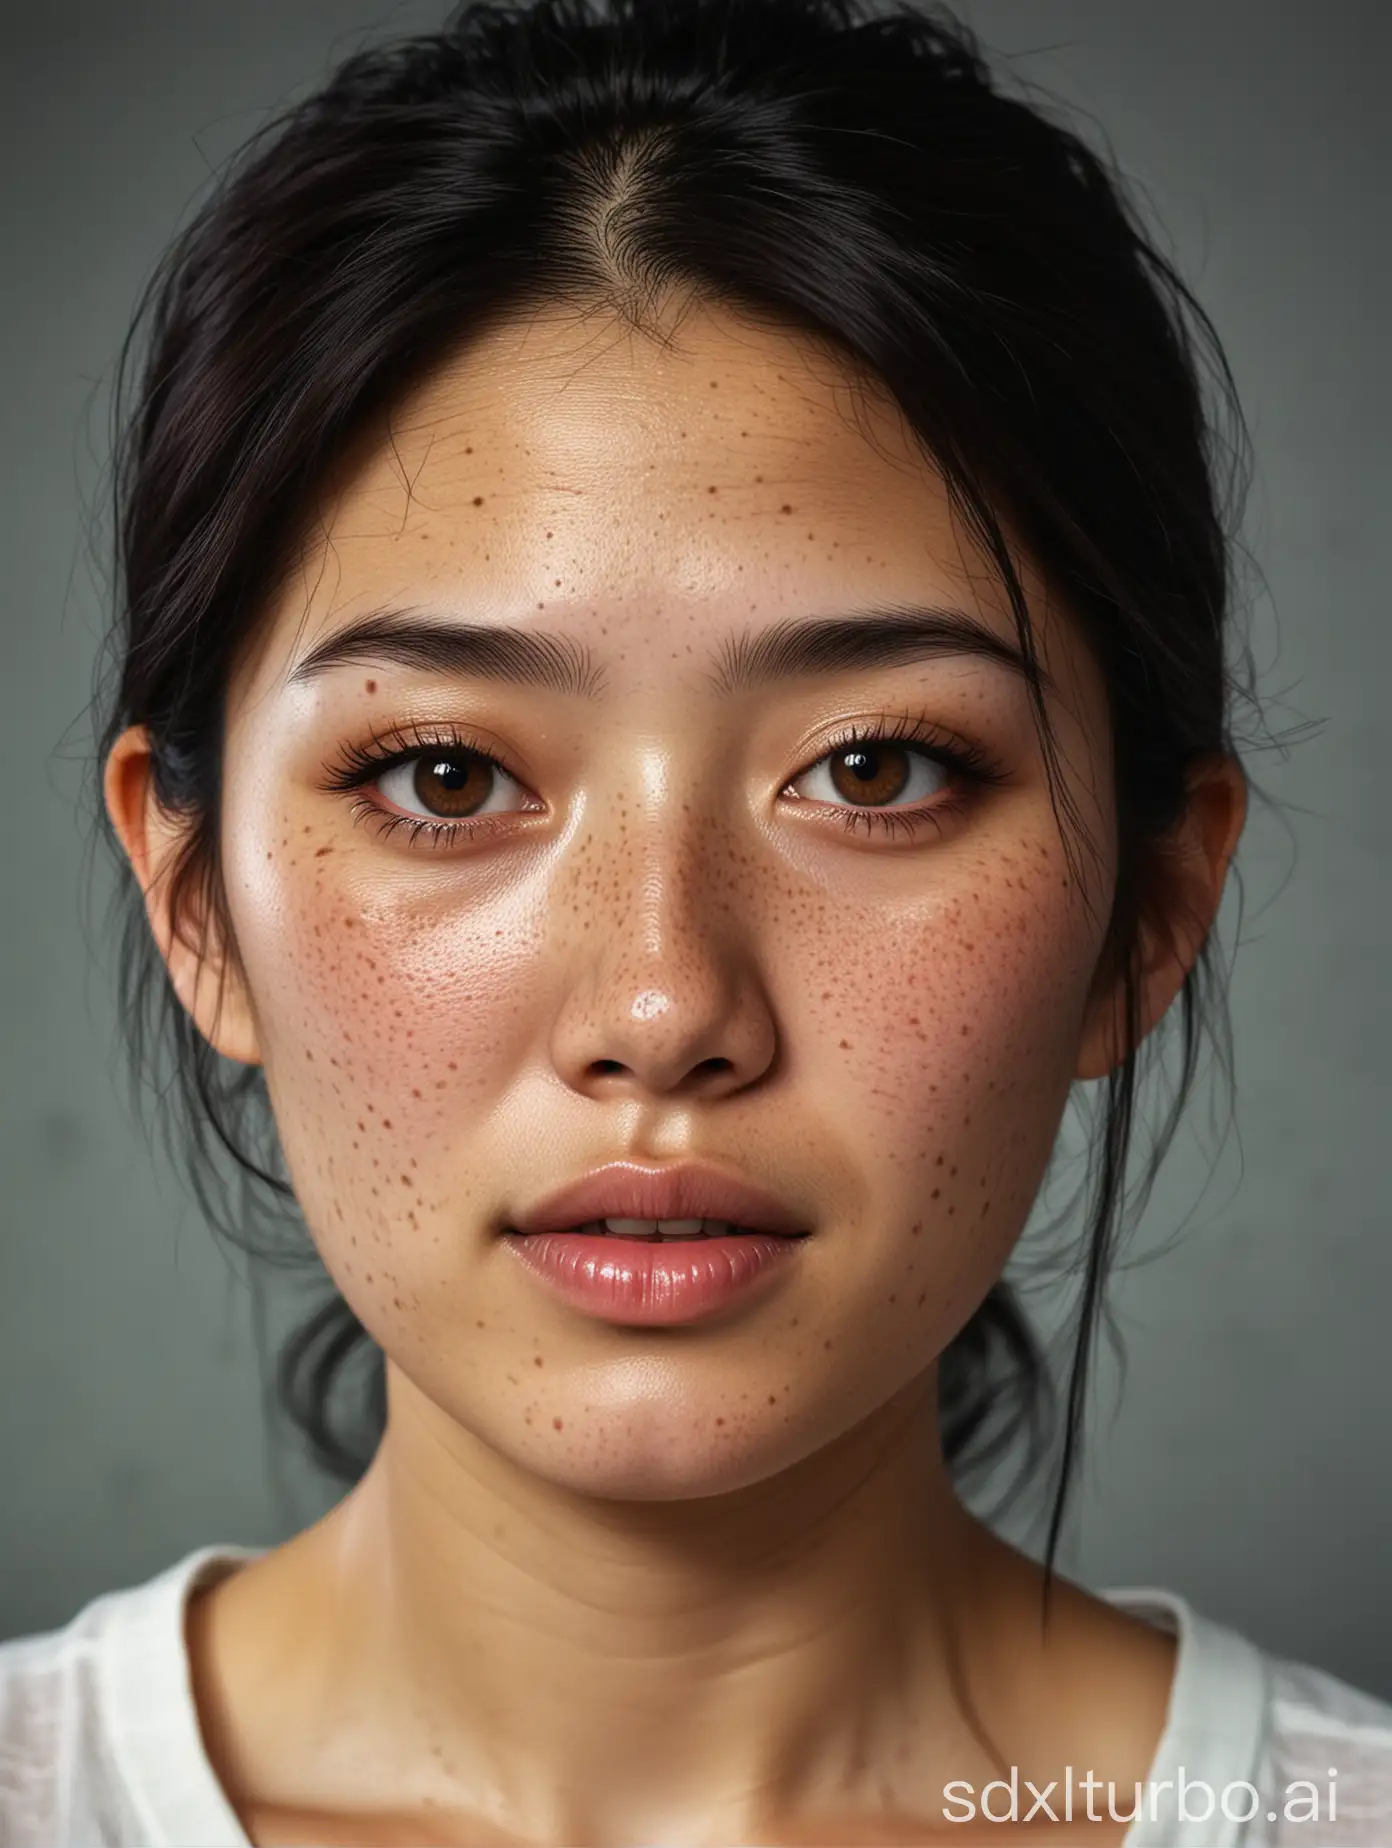 Generate an Asian ugly woman, covered in freckles, dark skin, fat